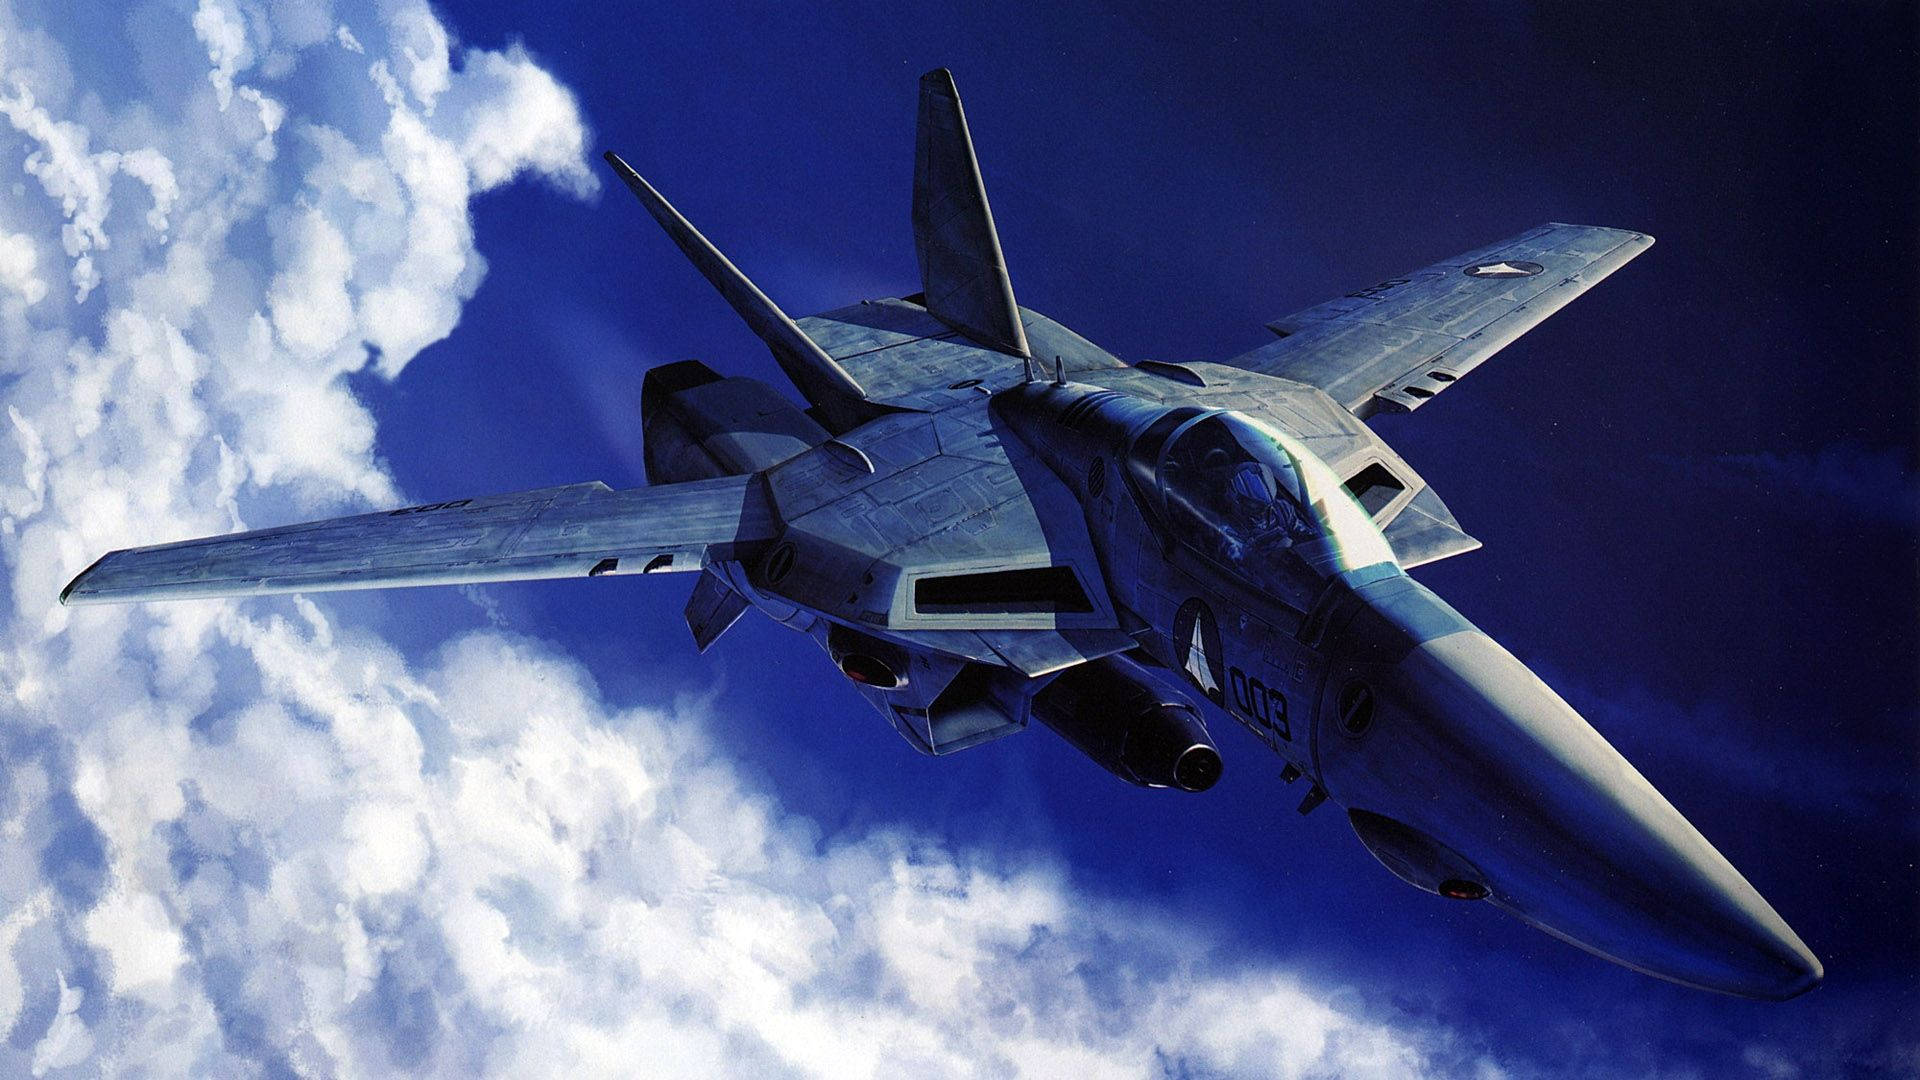 Detailed Macross Jet Aircraft Background